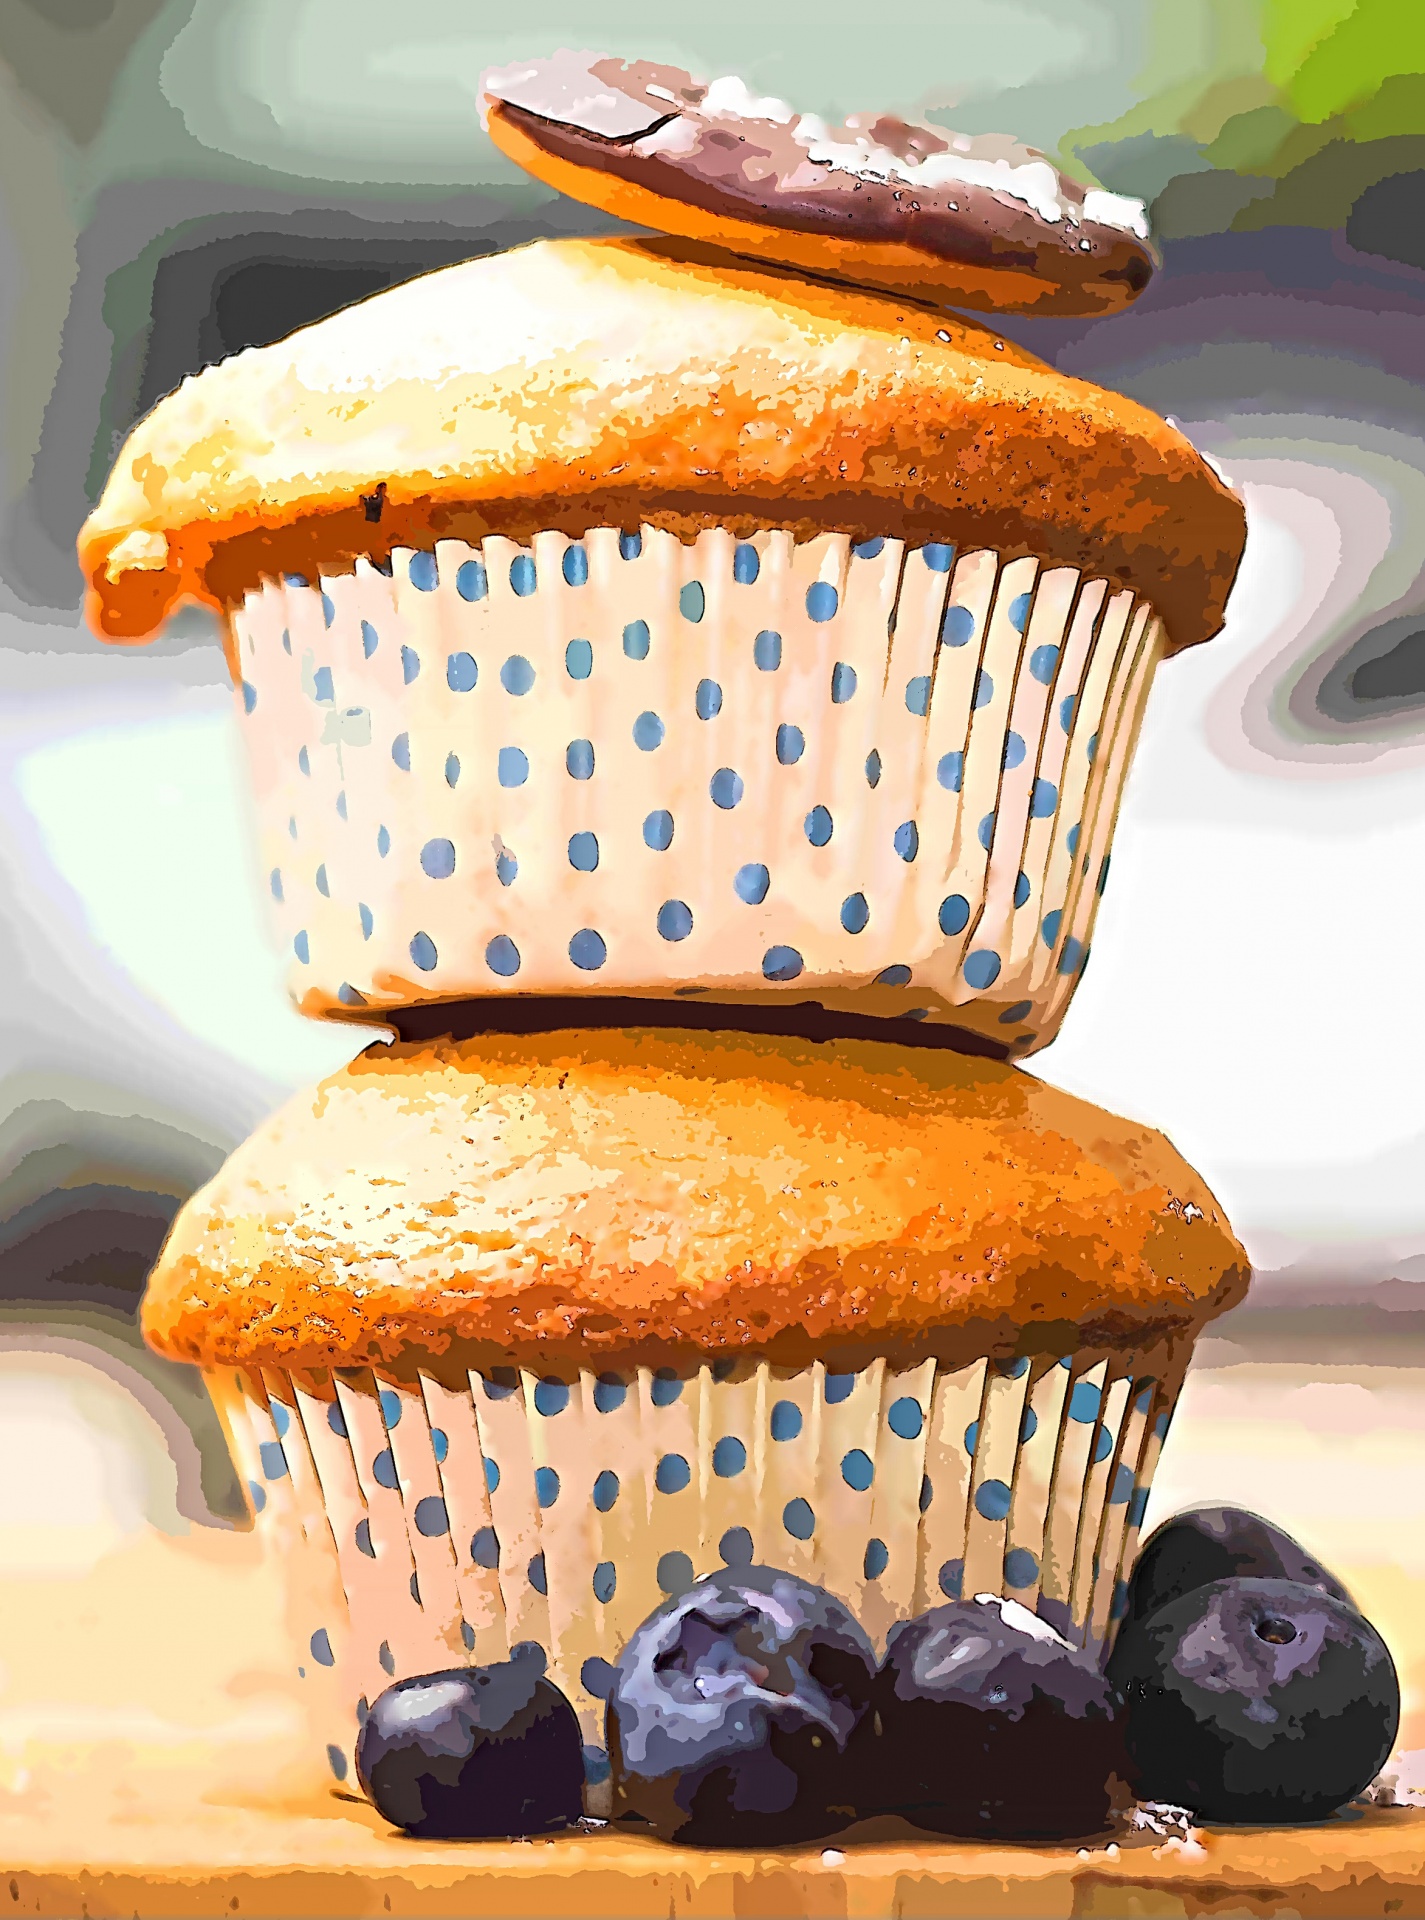 Muffins and blueberries illustration